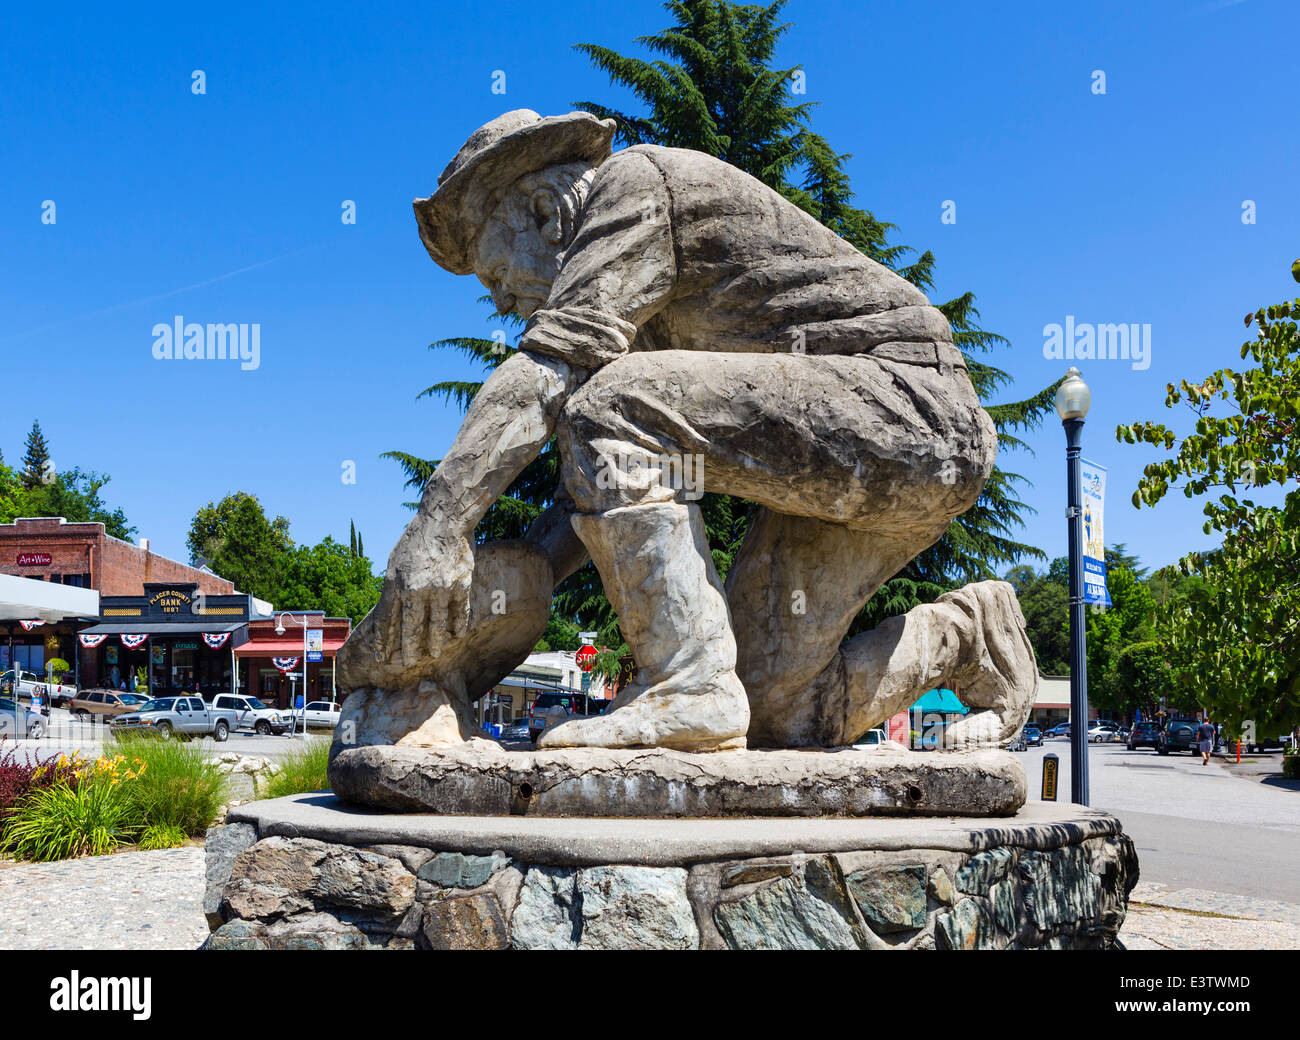 Claude Chana by Kenneth Fox, sculpture of miner panning for gold, old town Auburn, 'Mother Lode' Gold Country, California, USA Stock Photo